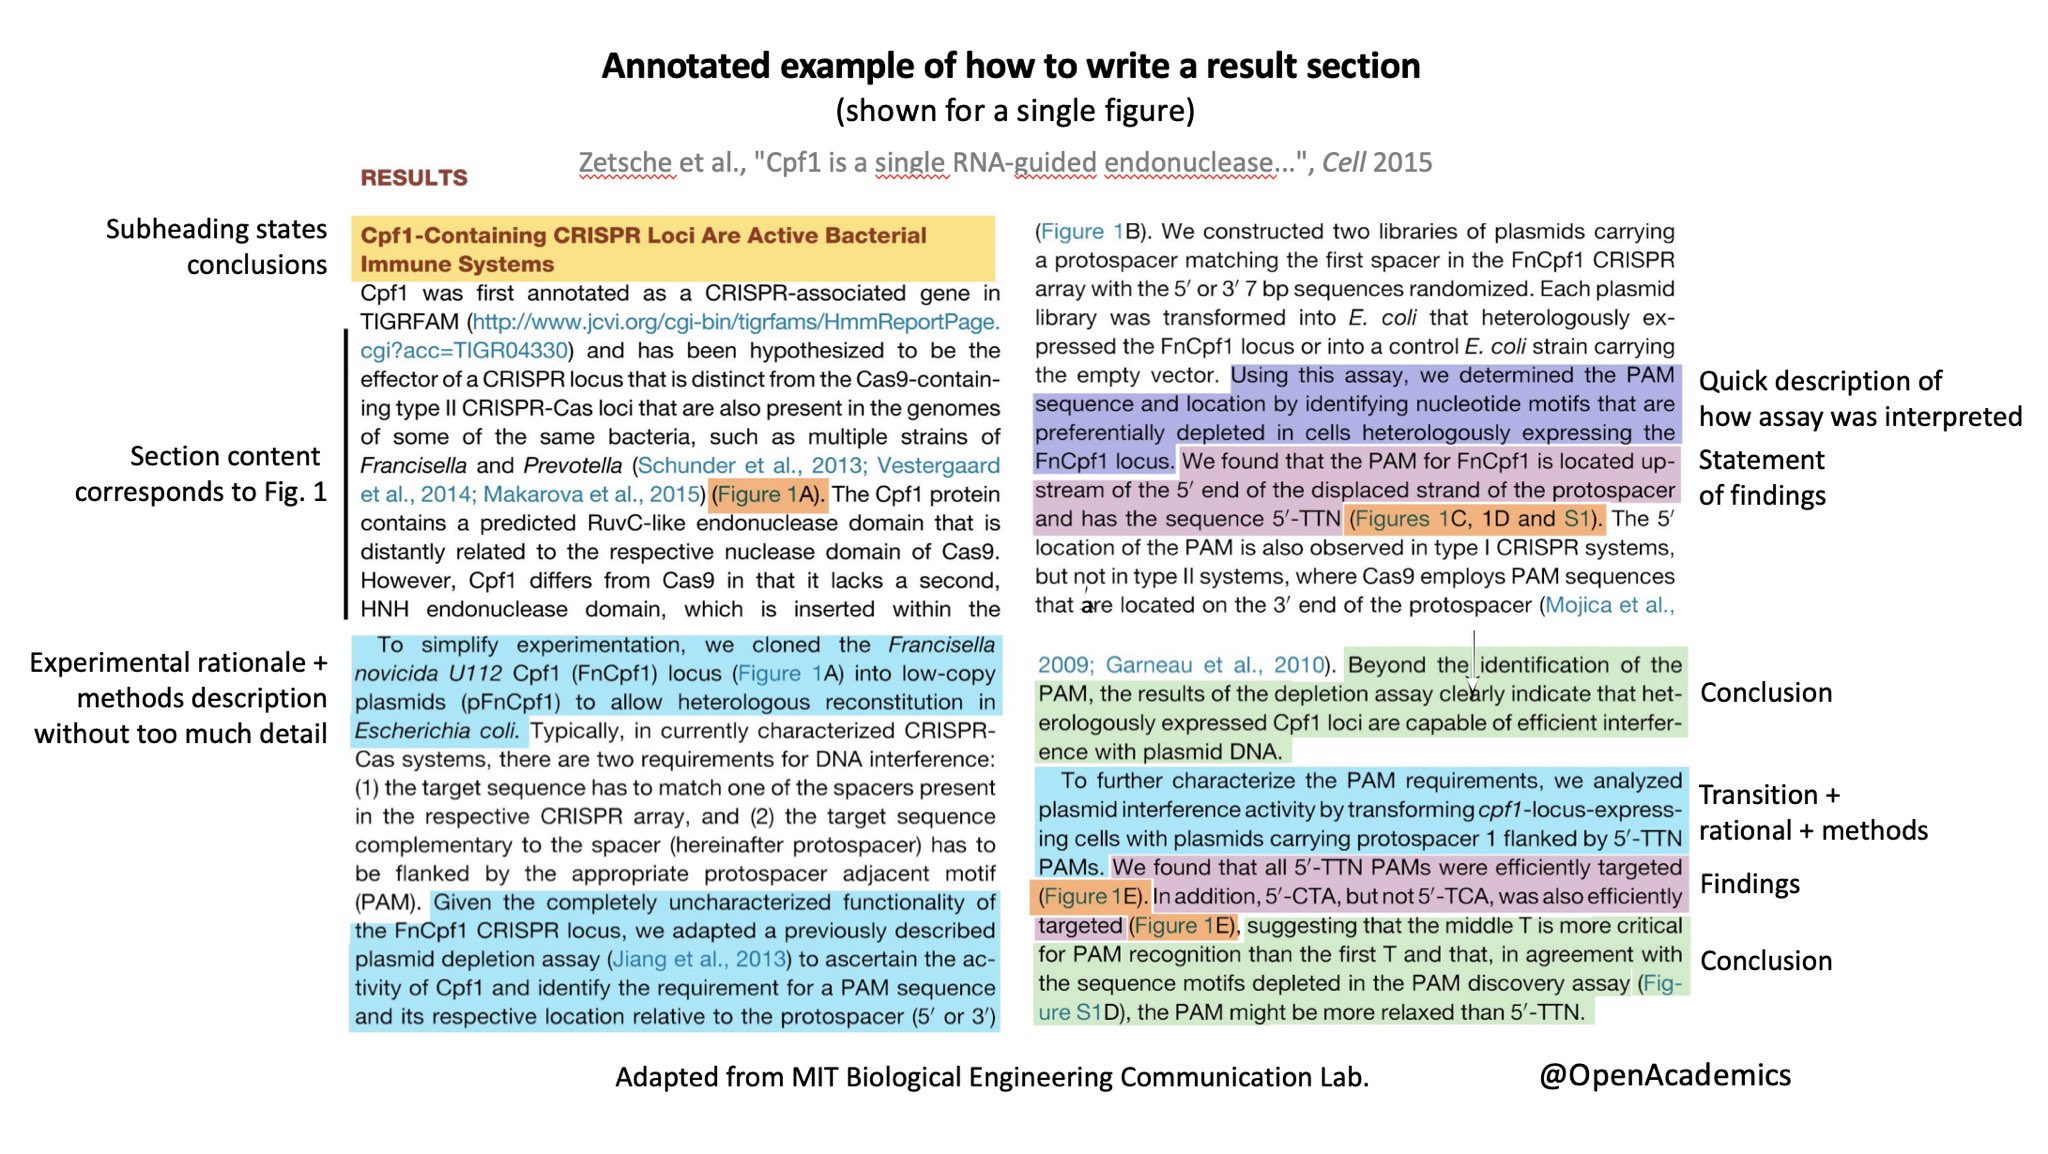 OpenAcademics on Twitter: "Writing a paper: Annotated examples of